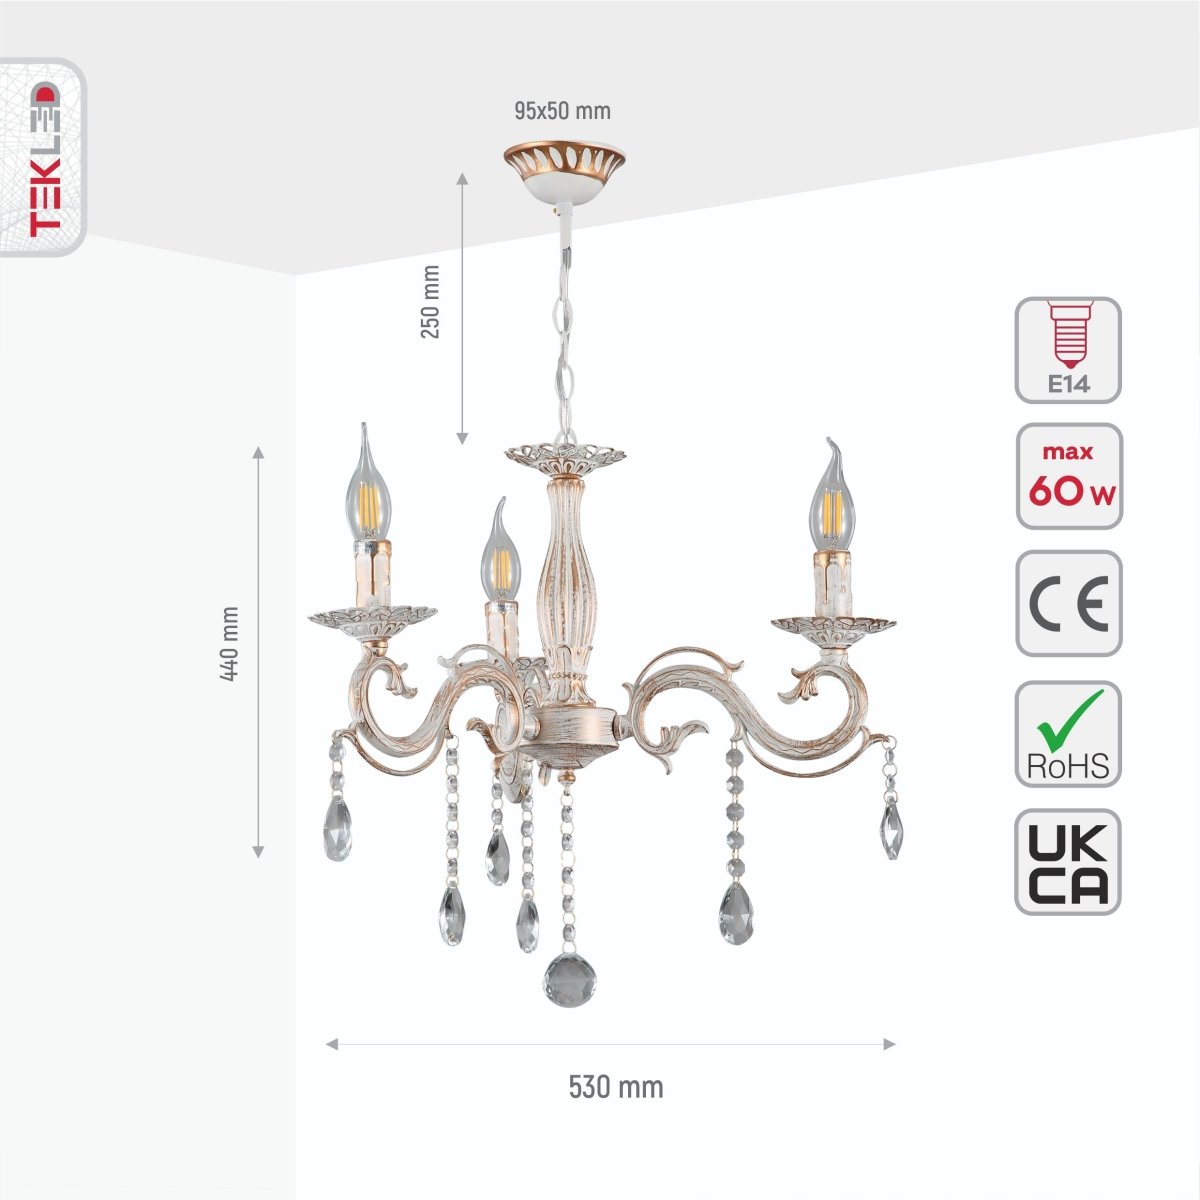 Size and specs of Candle Waterfall Traditional Retro Vintage 3 Arm Chandelier Ceiling Light Crystal Gold Aged Cream 3xE14 | TEKLED 159-17822